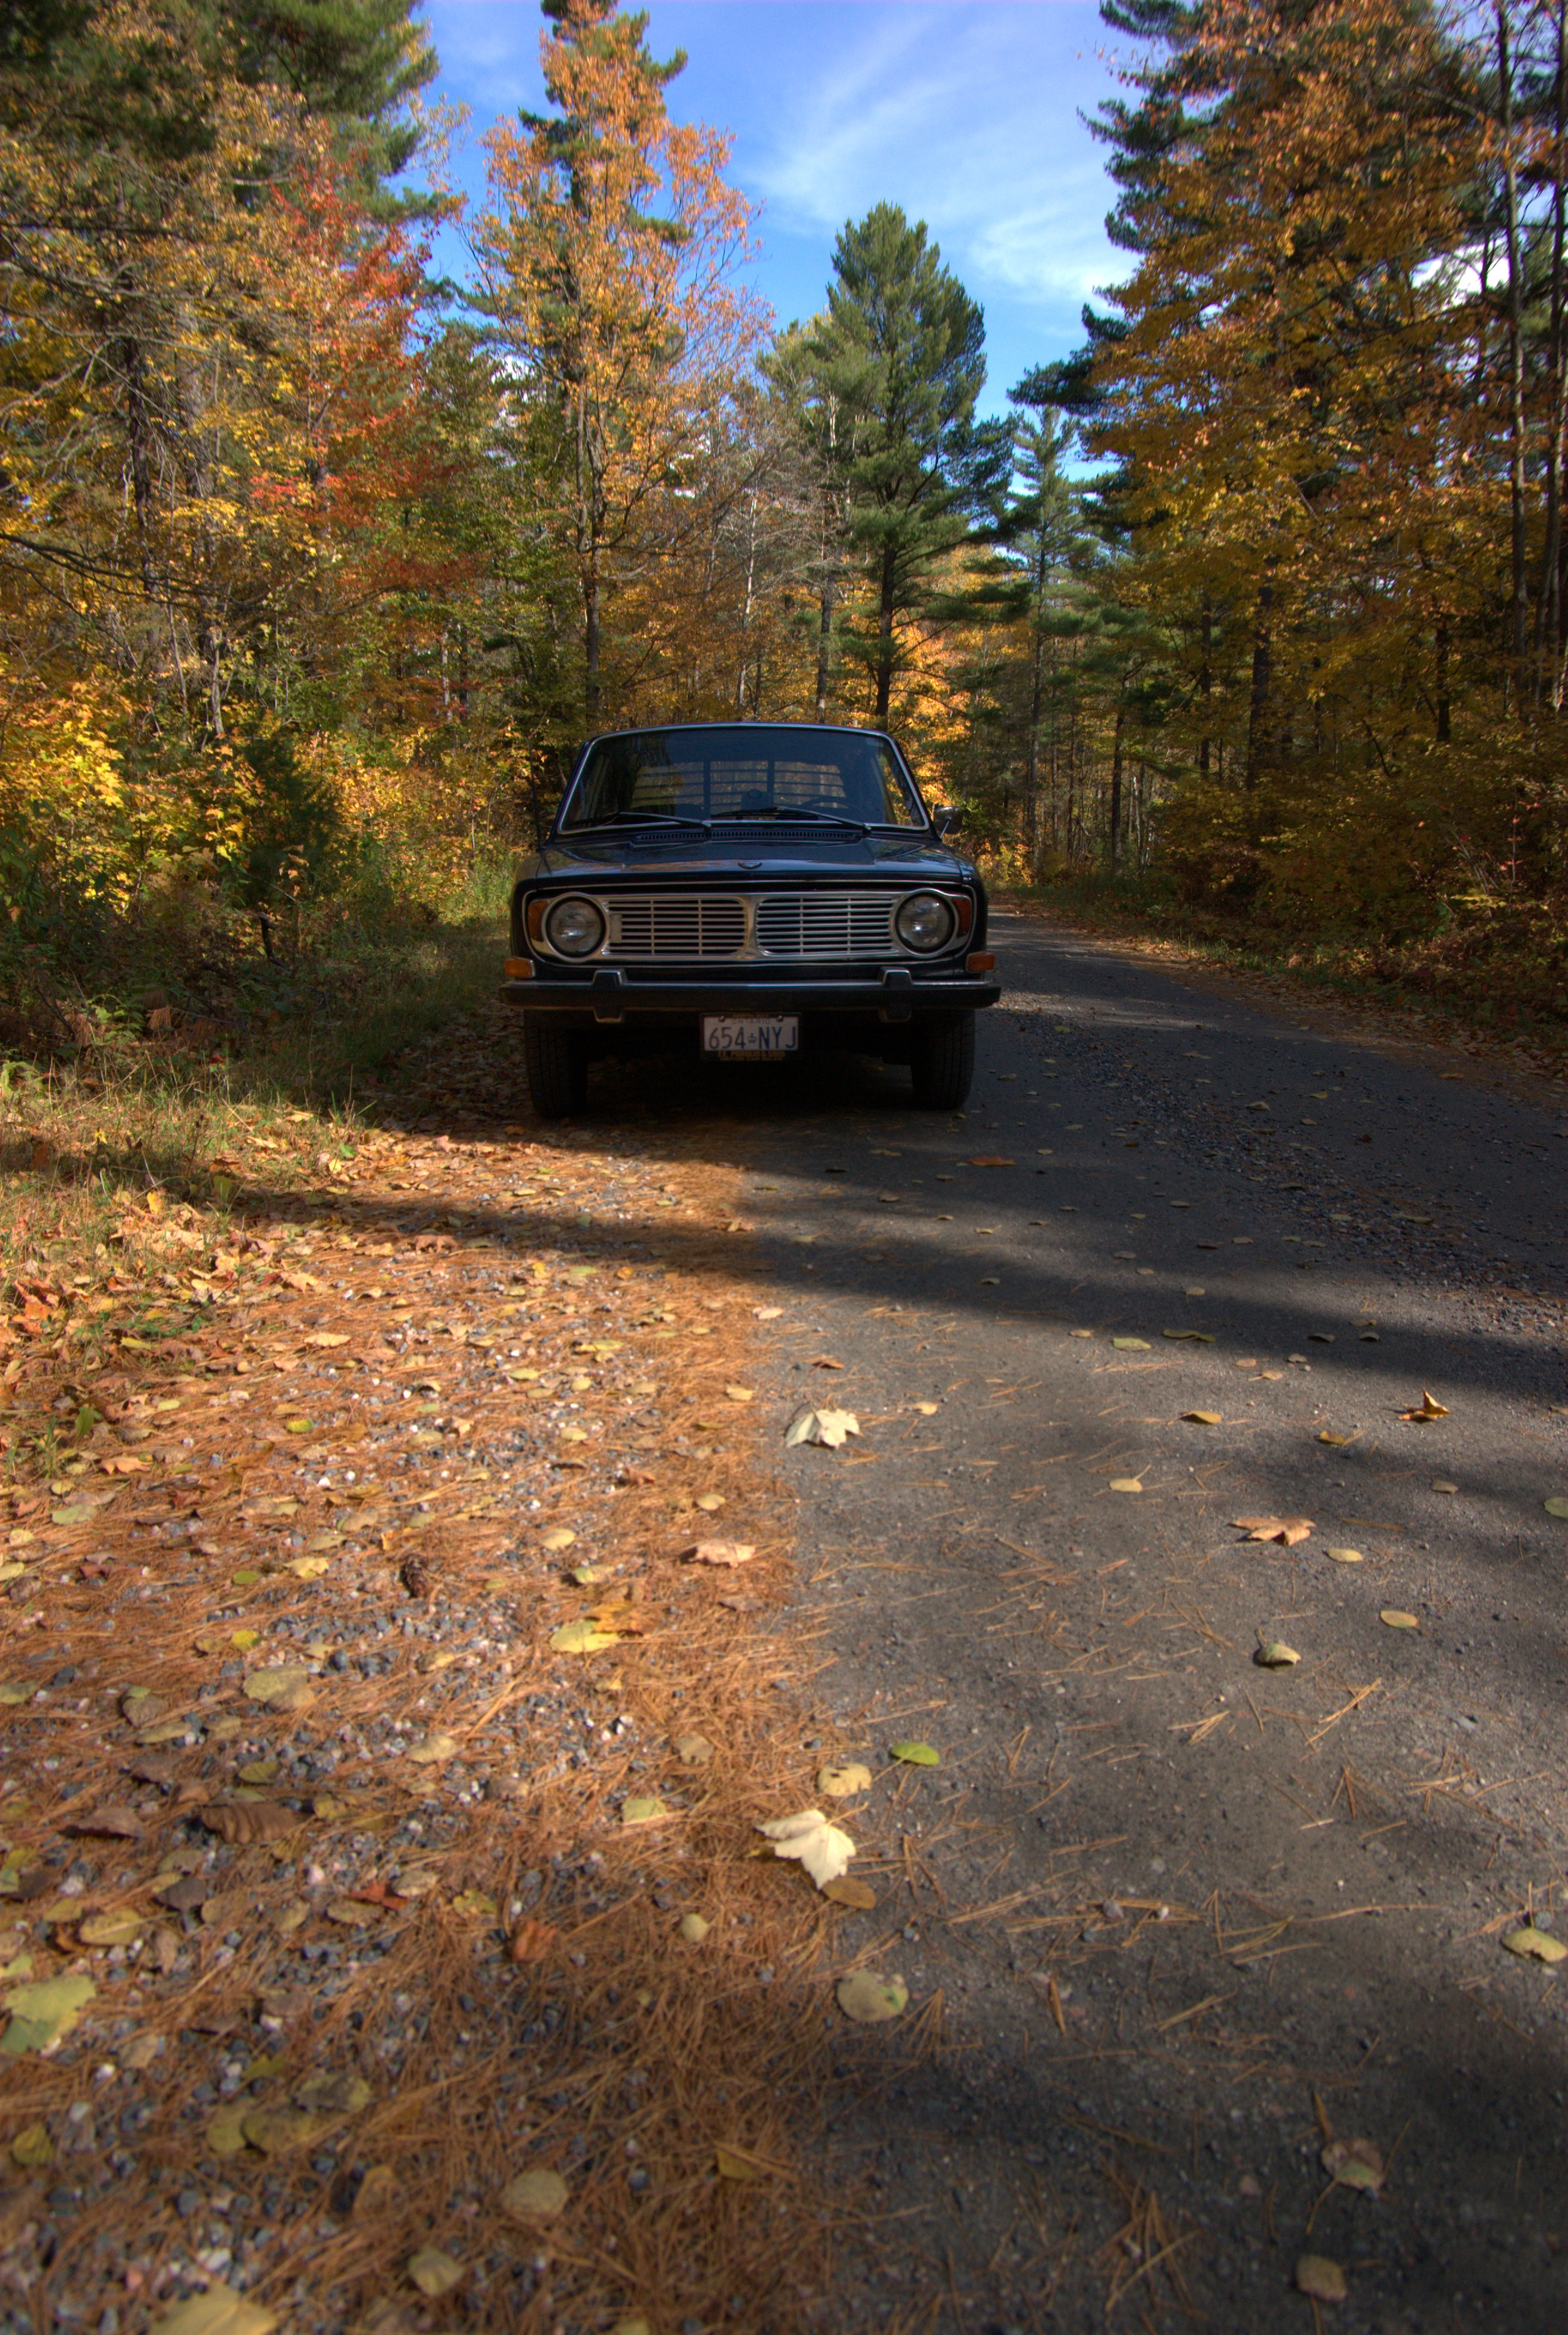 Volvo 142S in autumn woods | Flickr - Photo Sharing!